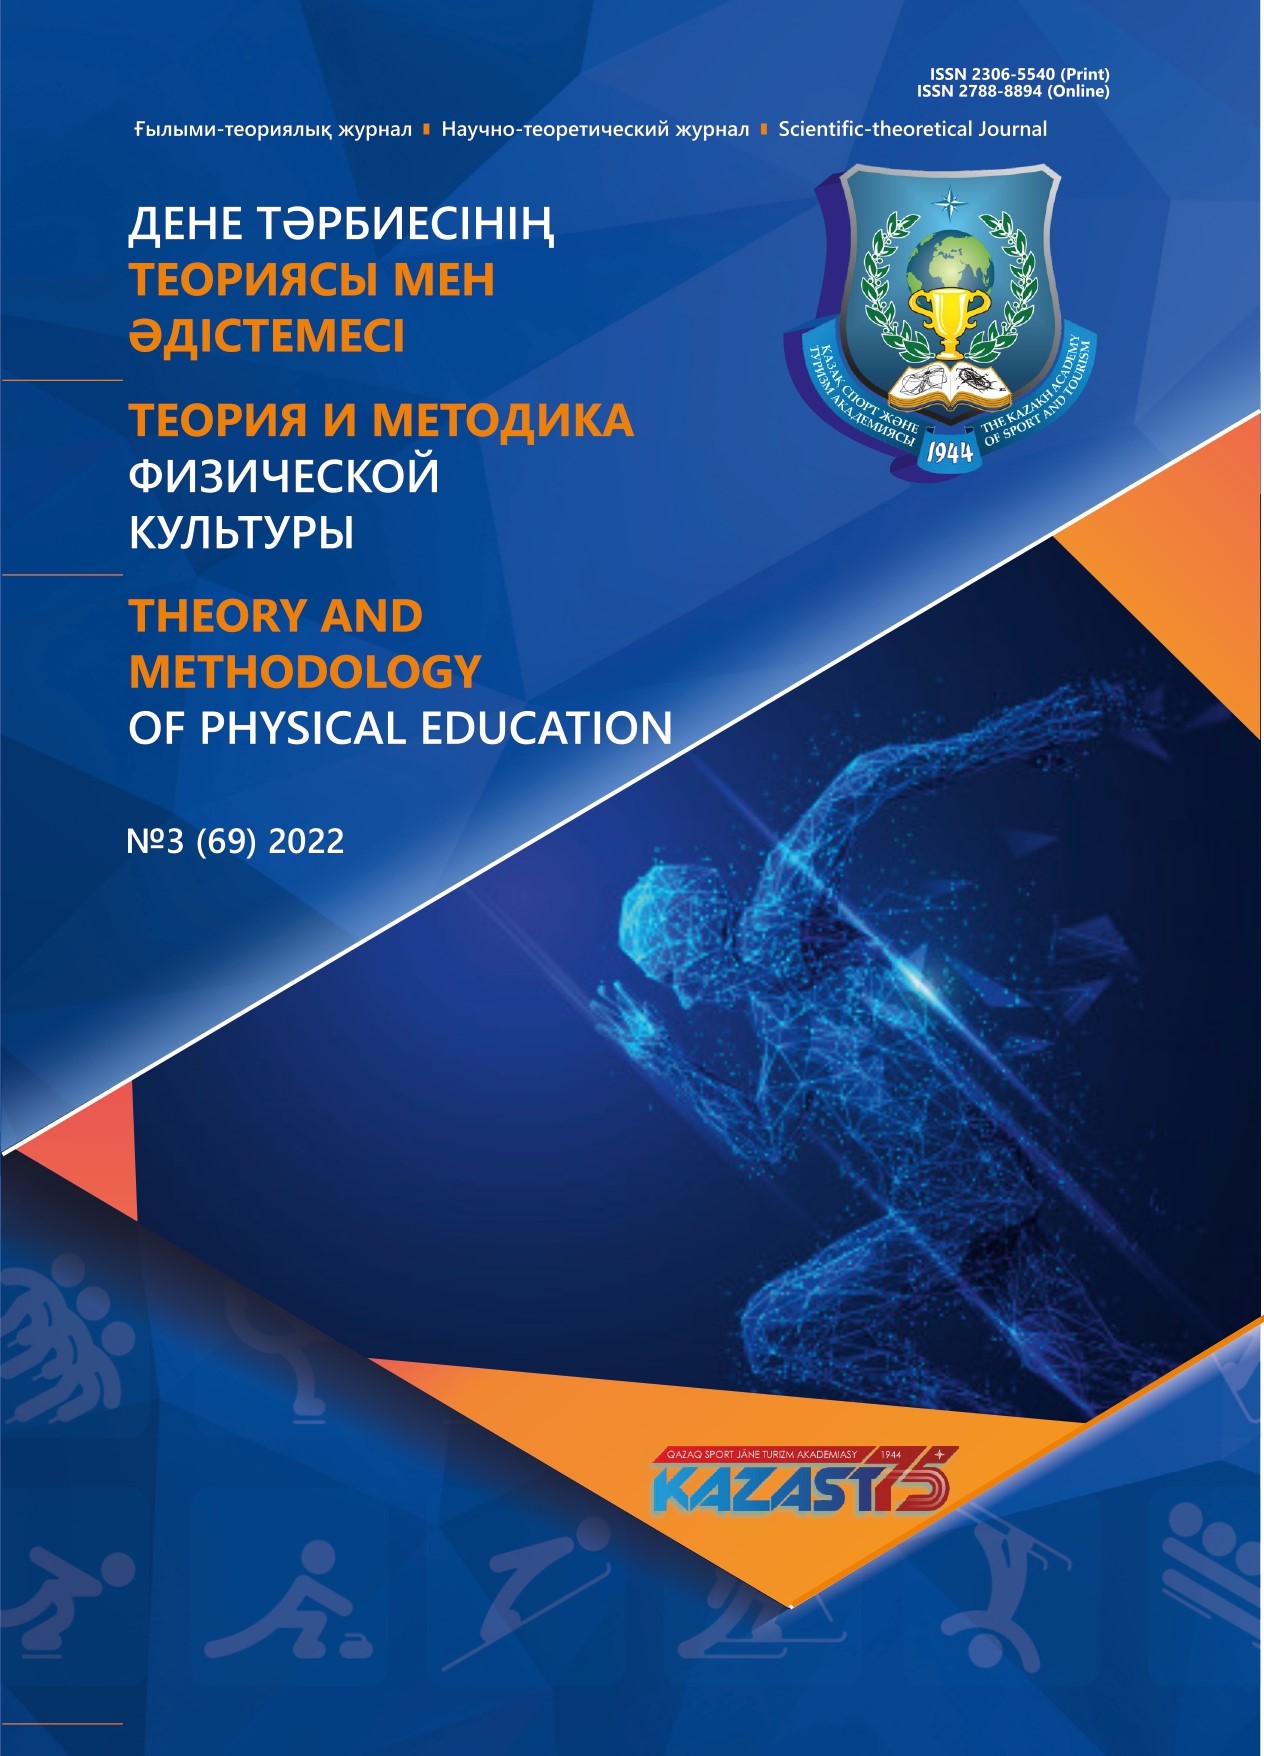 					View Vol. 69 No. 3 (2022): THEORY AND METHODOLOGY OF PHYSICAL EDUCATION
				